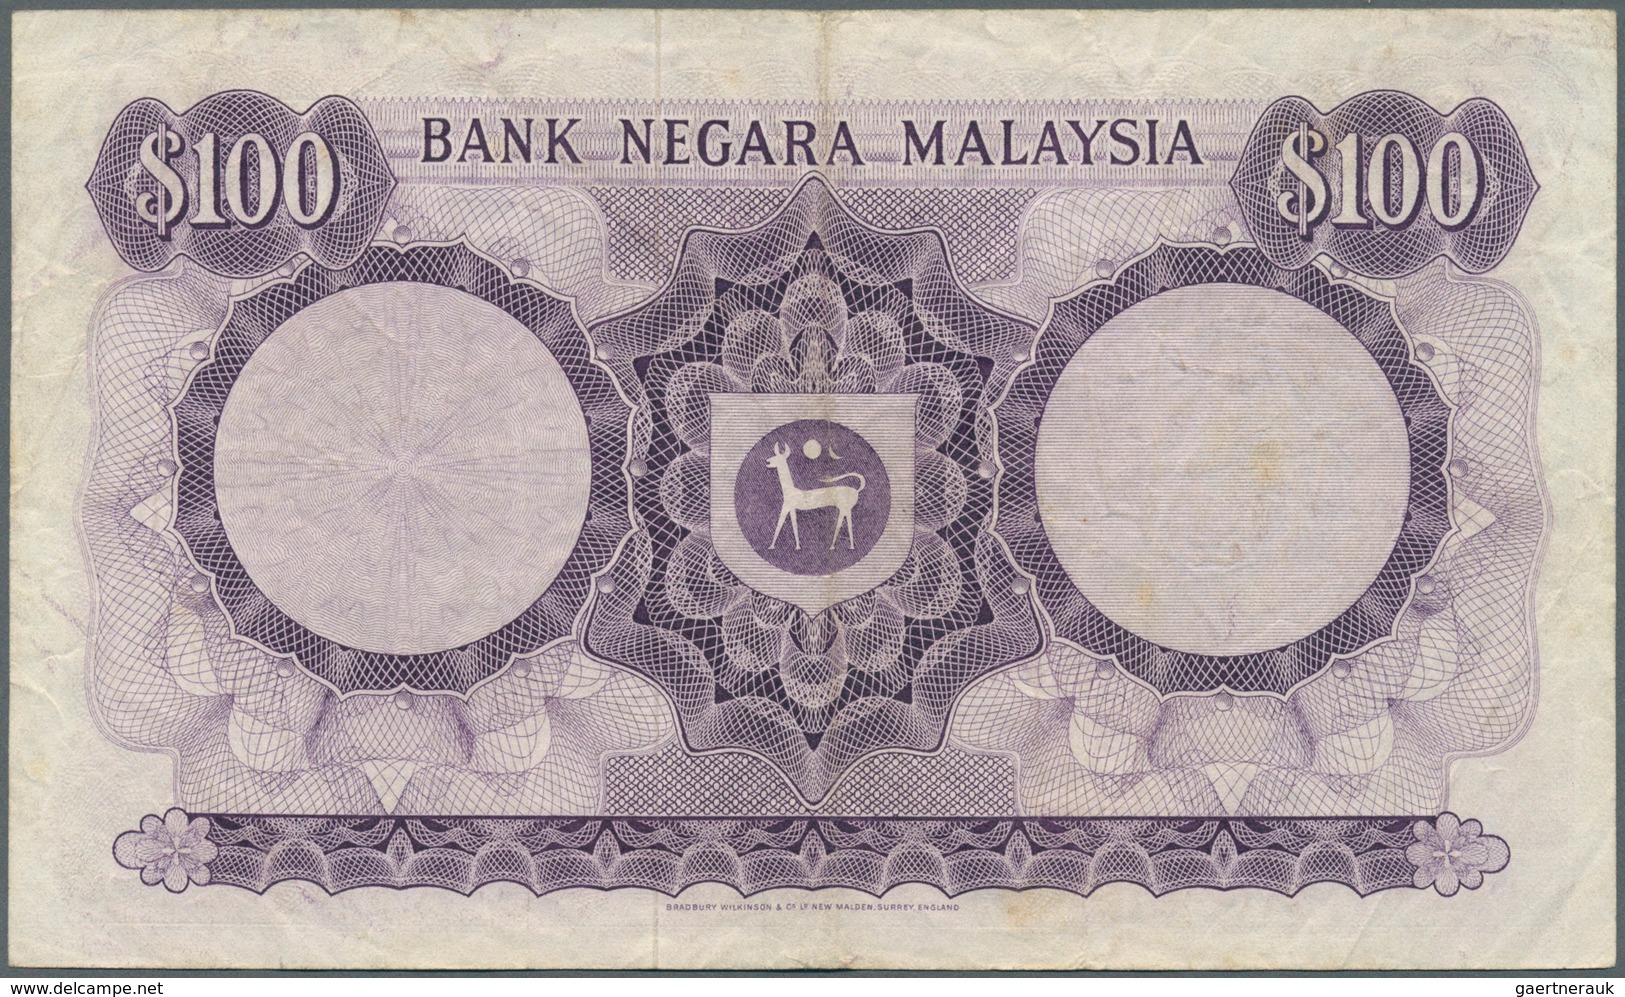 01991 Malaysia: Bank Negara Malaysia 100 Ringgit ND(1976-81), P.17, Still Nice And Attractive Note With A - Malaysia